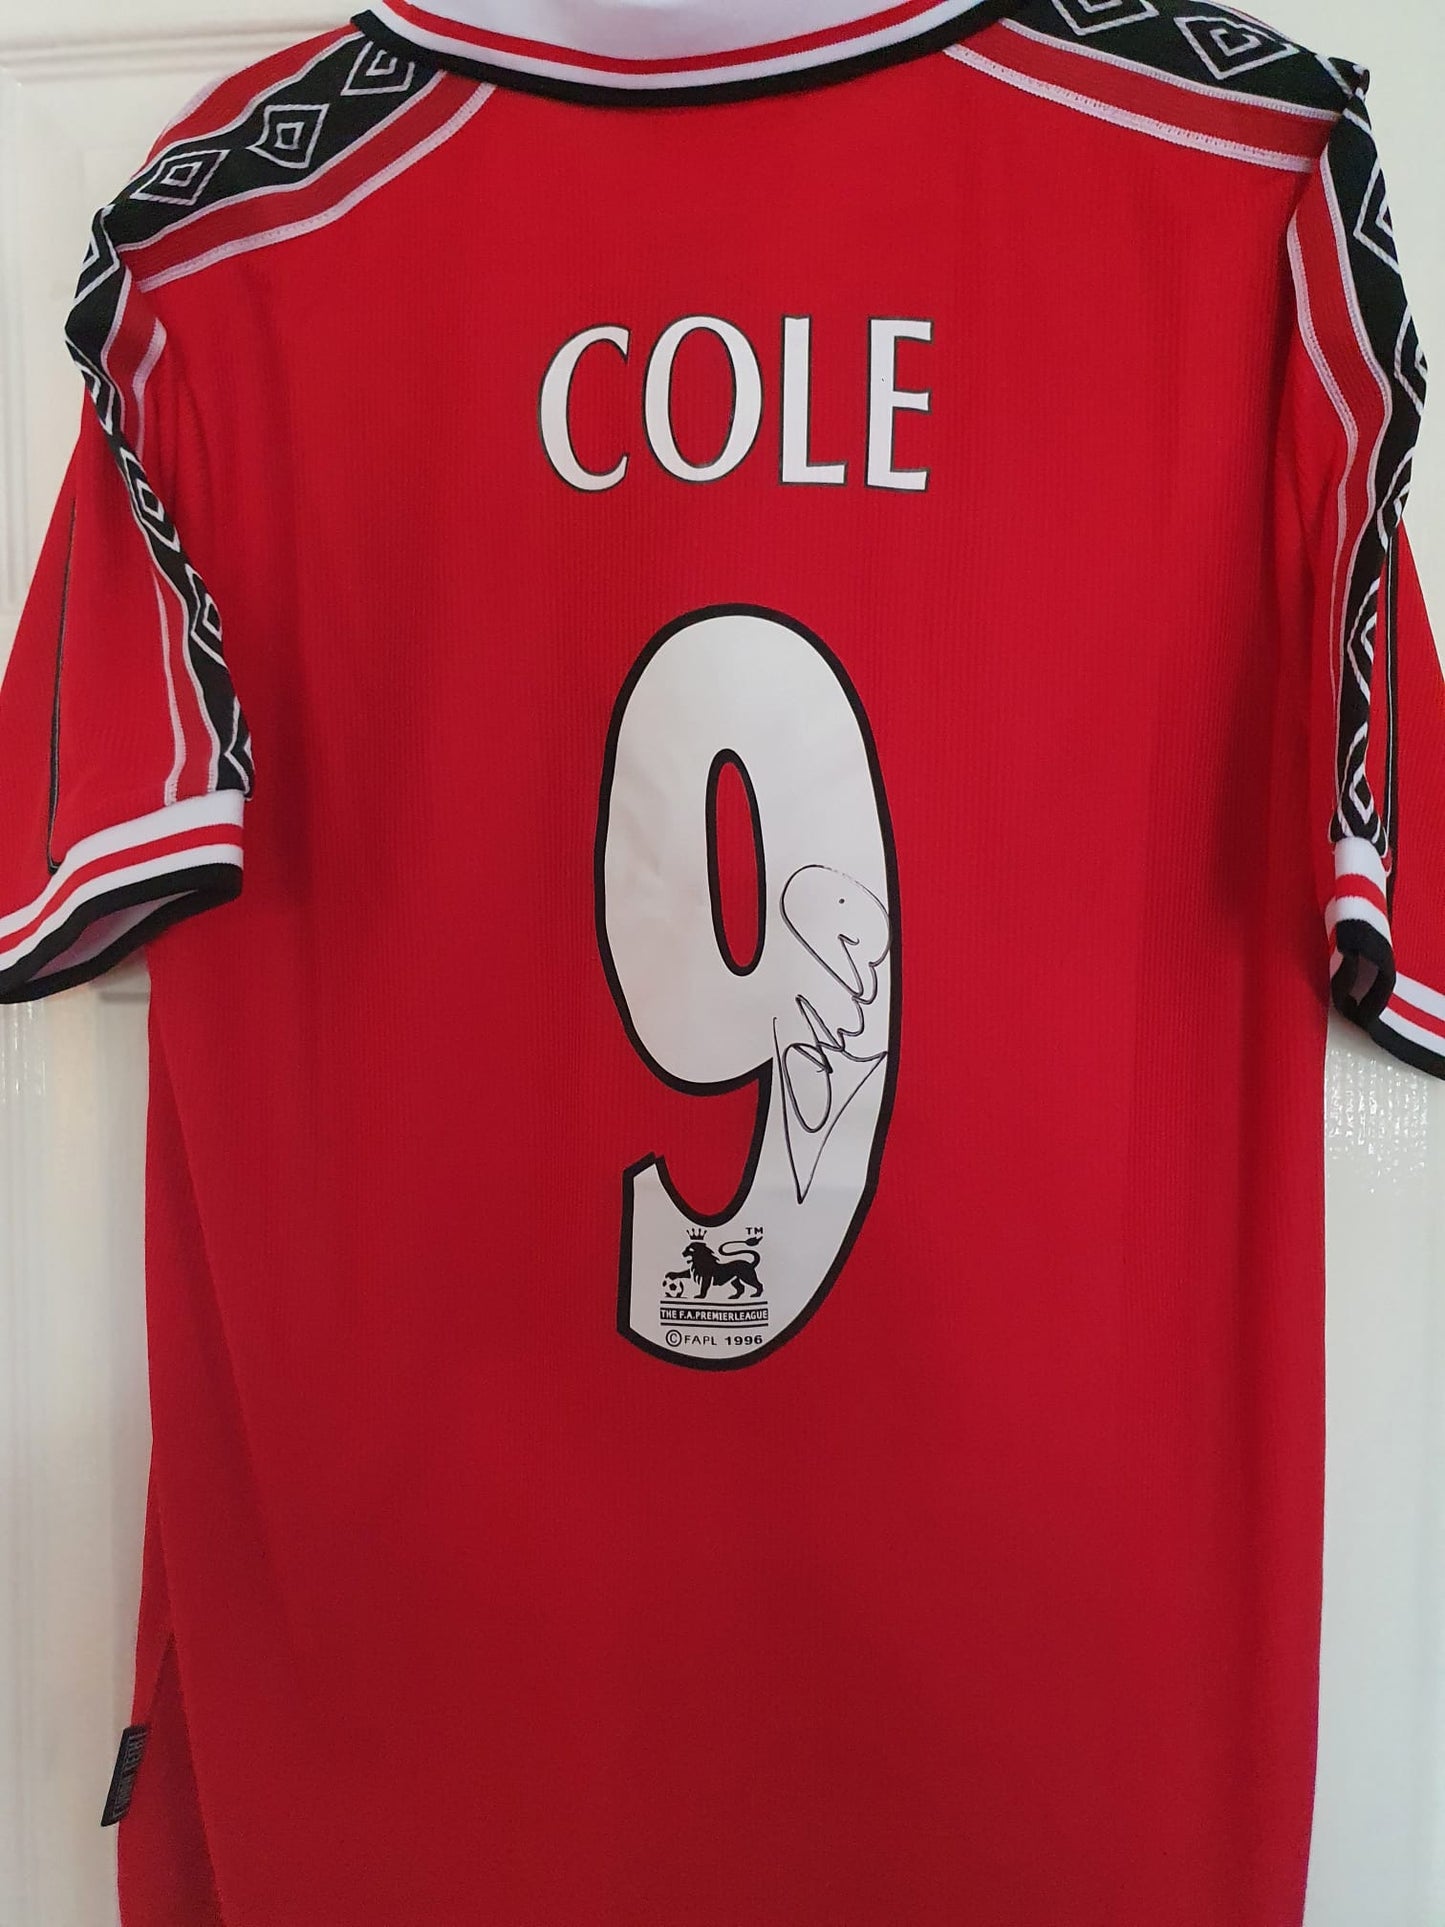 Andrew Cole hand Signed 1999 treble Manchester United Shirt